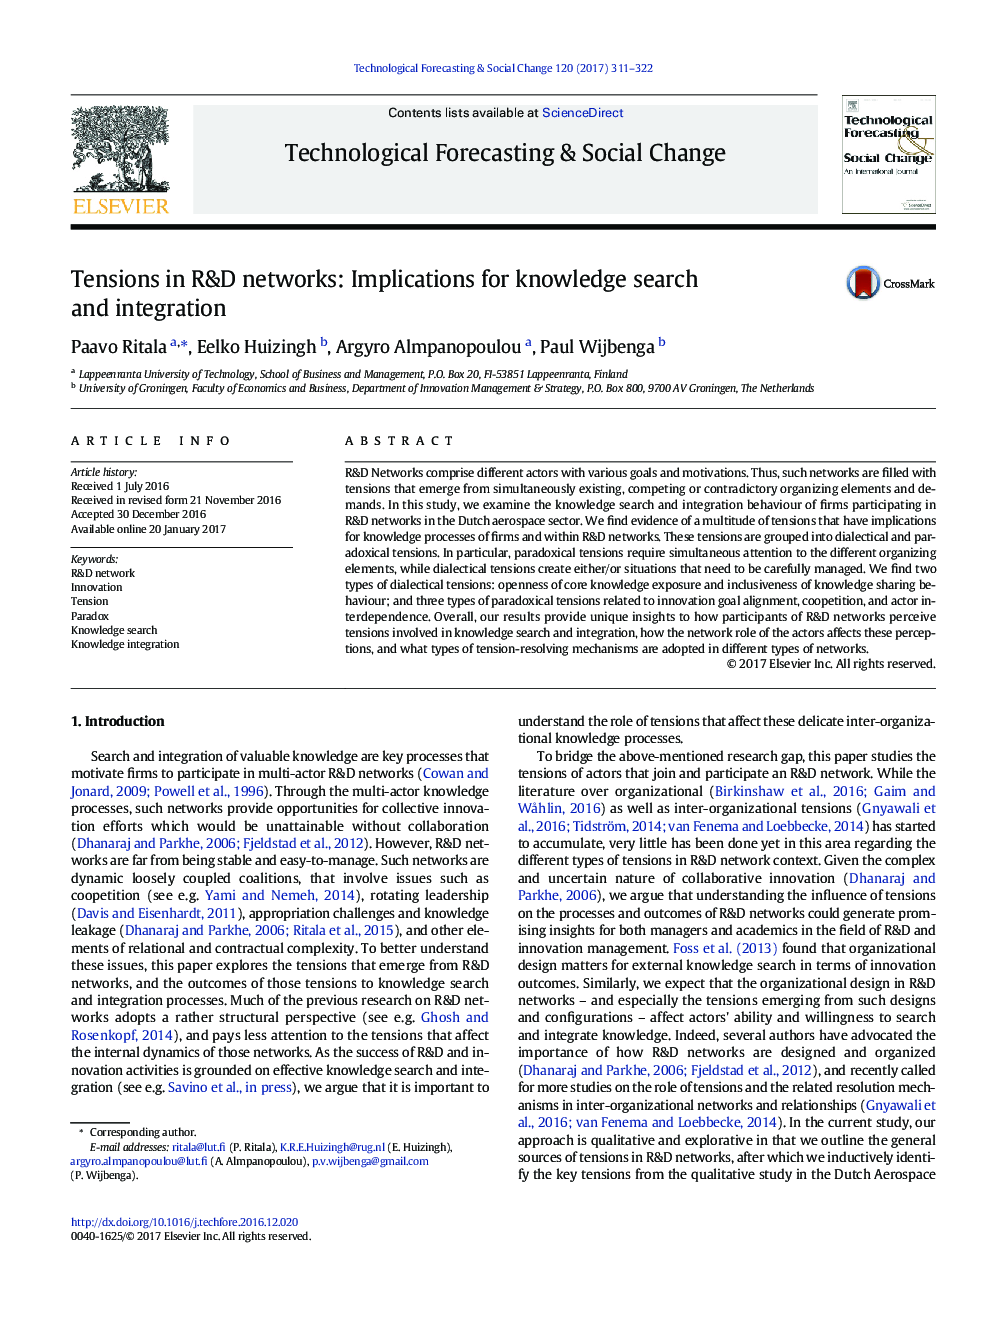 Tensions in R&D networks: Implications for knowledge search and integration